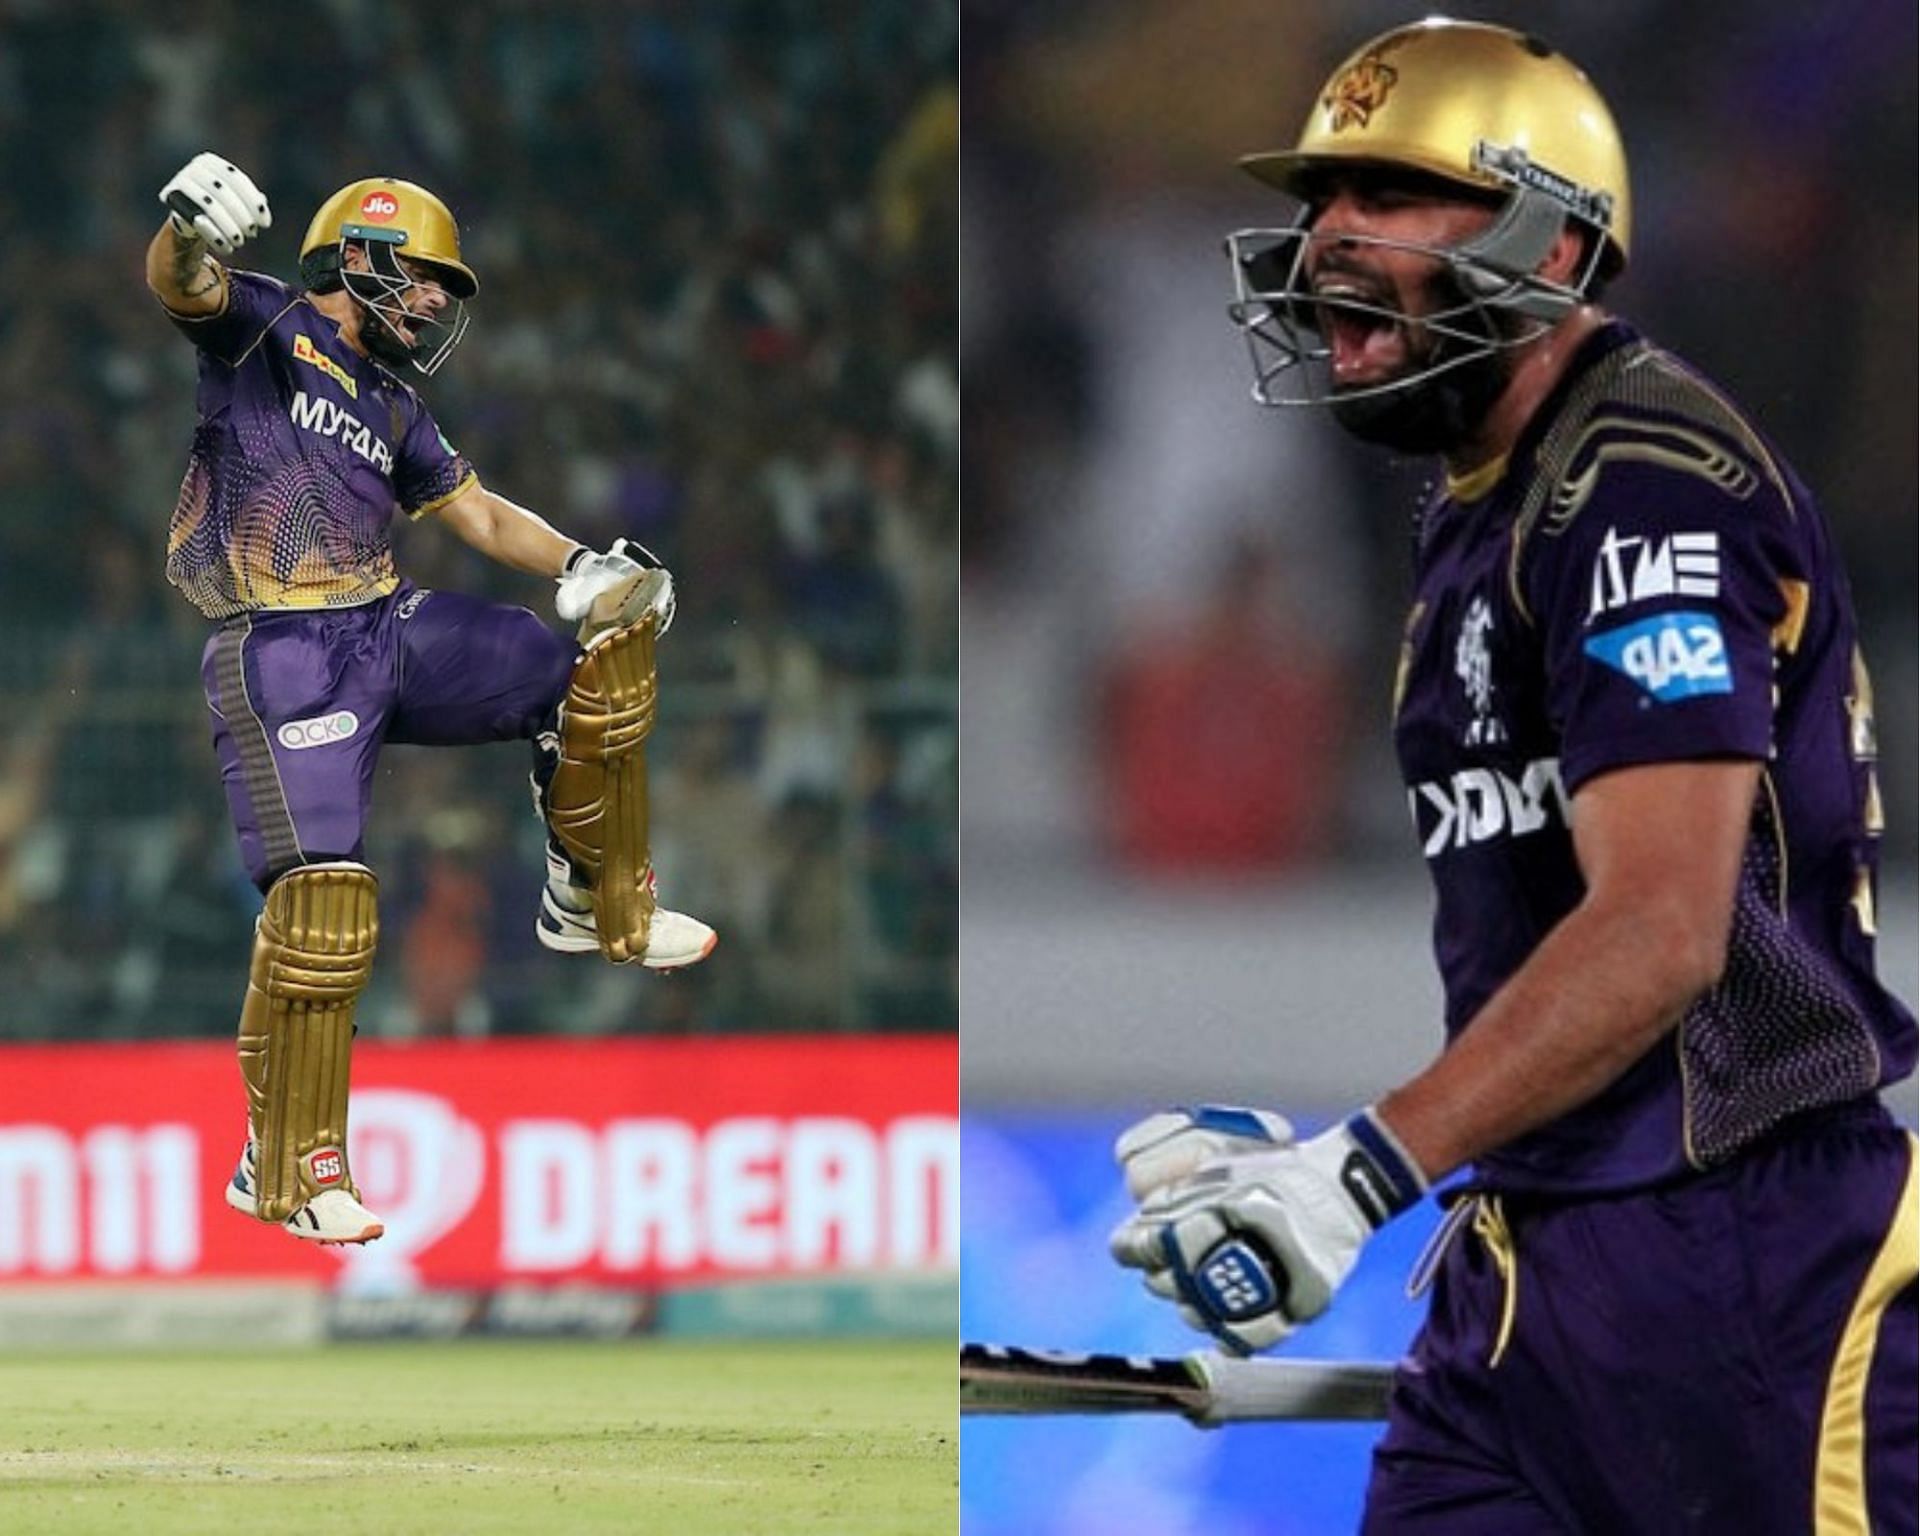 KKR has found a new finisher in Rinku Singh, who can emulate what Yusuf Pathan used to do for them. Pic: Jio Cinema